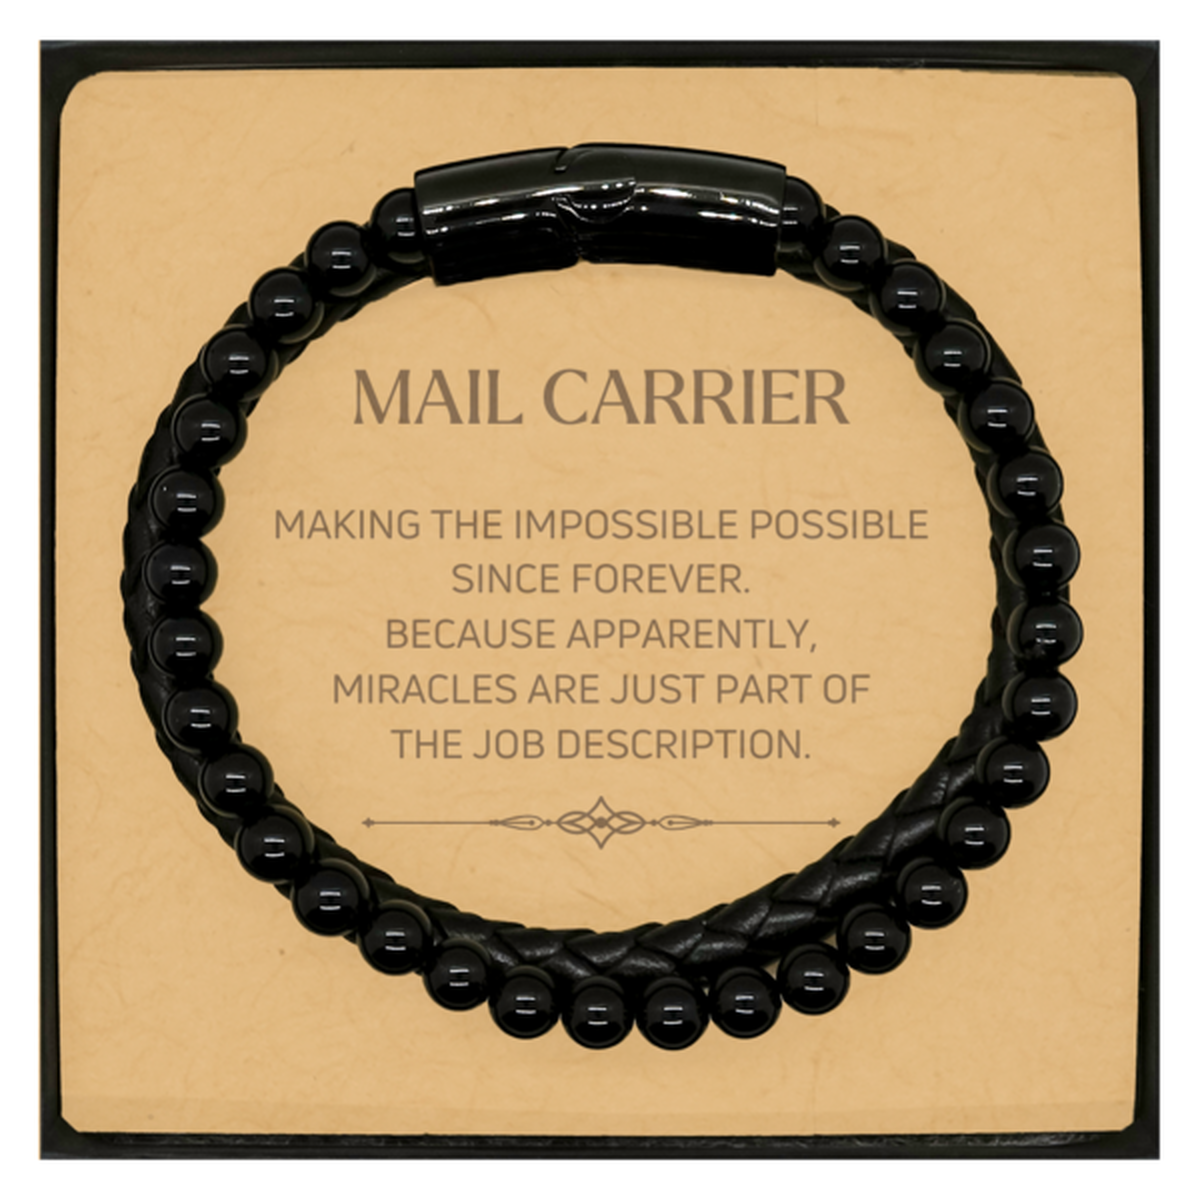 Funny Mail Carrier Gifts, Miracles are just part of the job description, Inspirational Birthday Christmas Stone Leather Bracelets For Mail Carrier, Men, Women, Coworkers, Friends, Boss